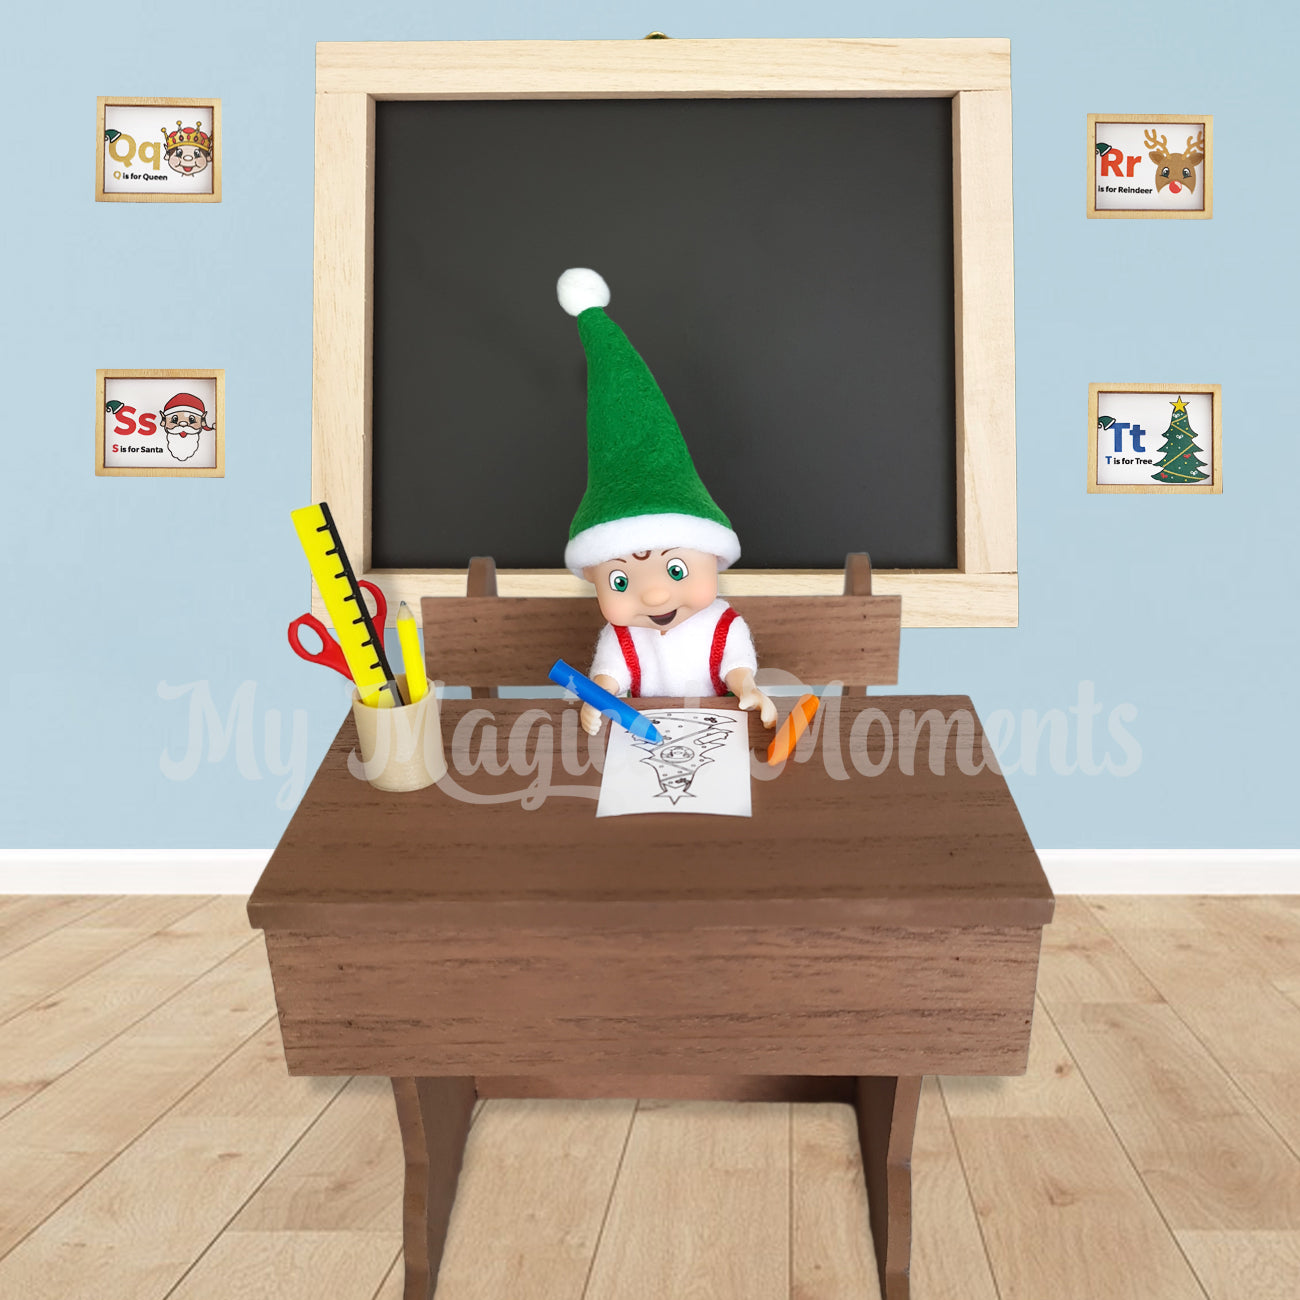 Elf toddler colouring on an elf sized school desk with crayons and miniature stationery. There is a chalkboard behind